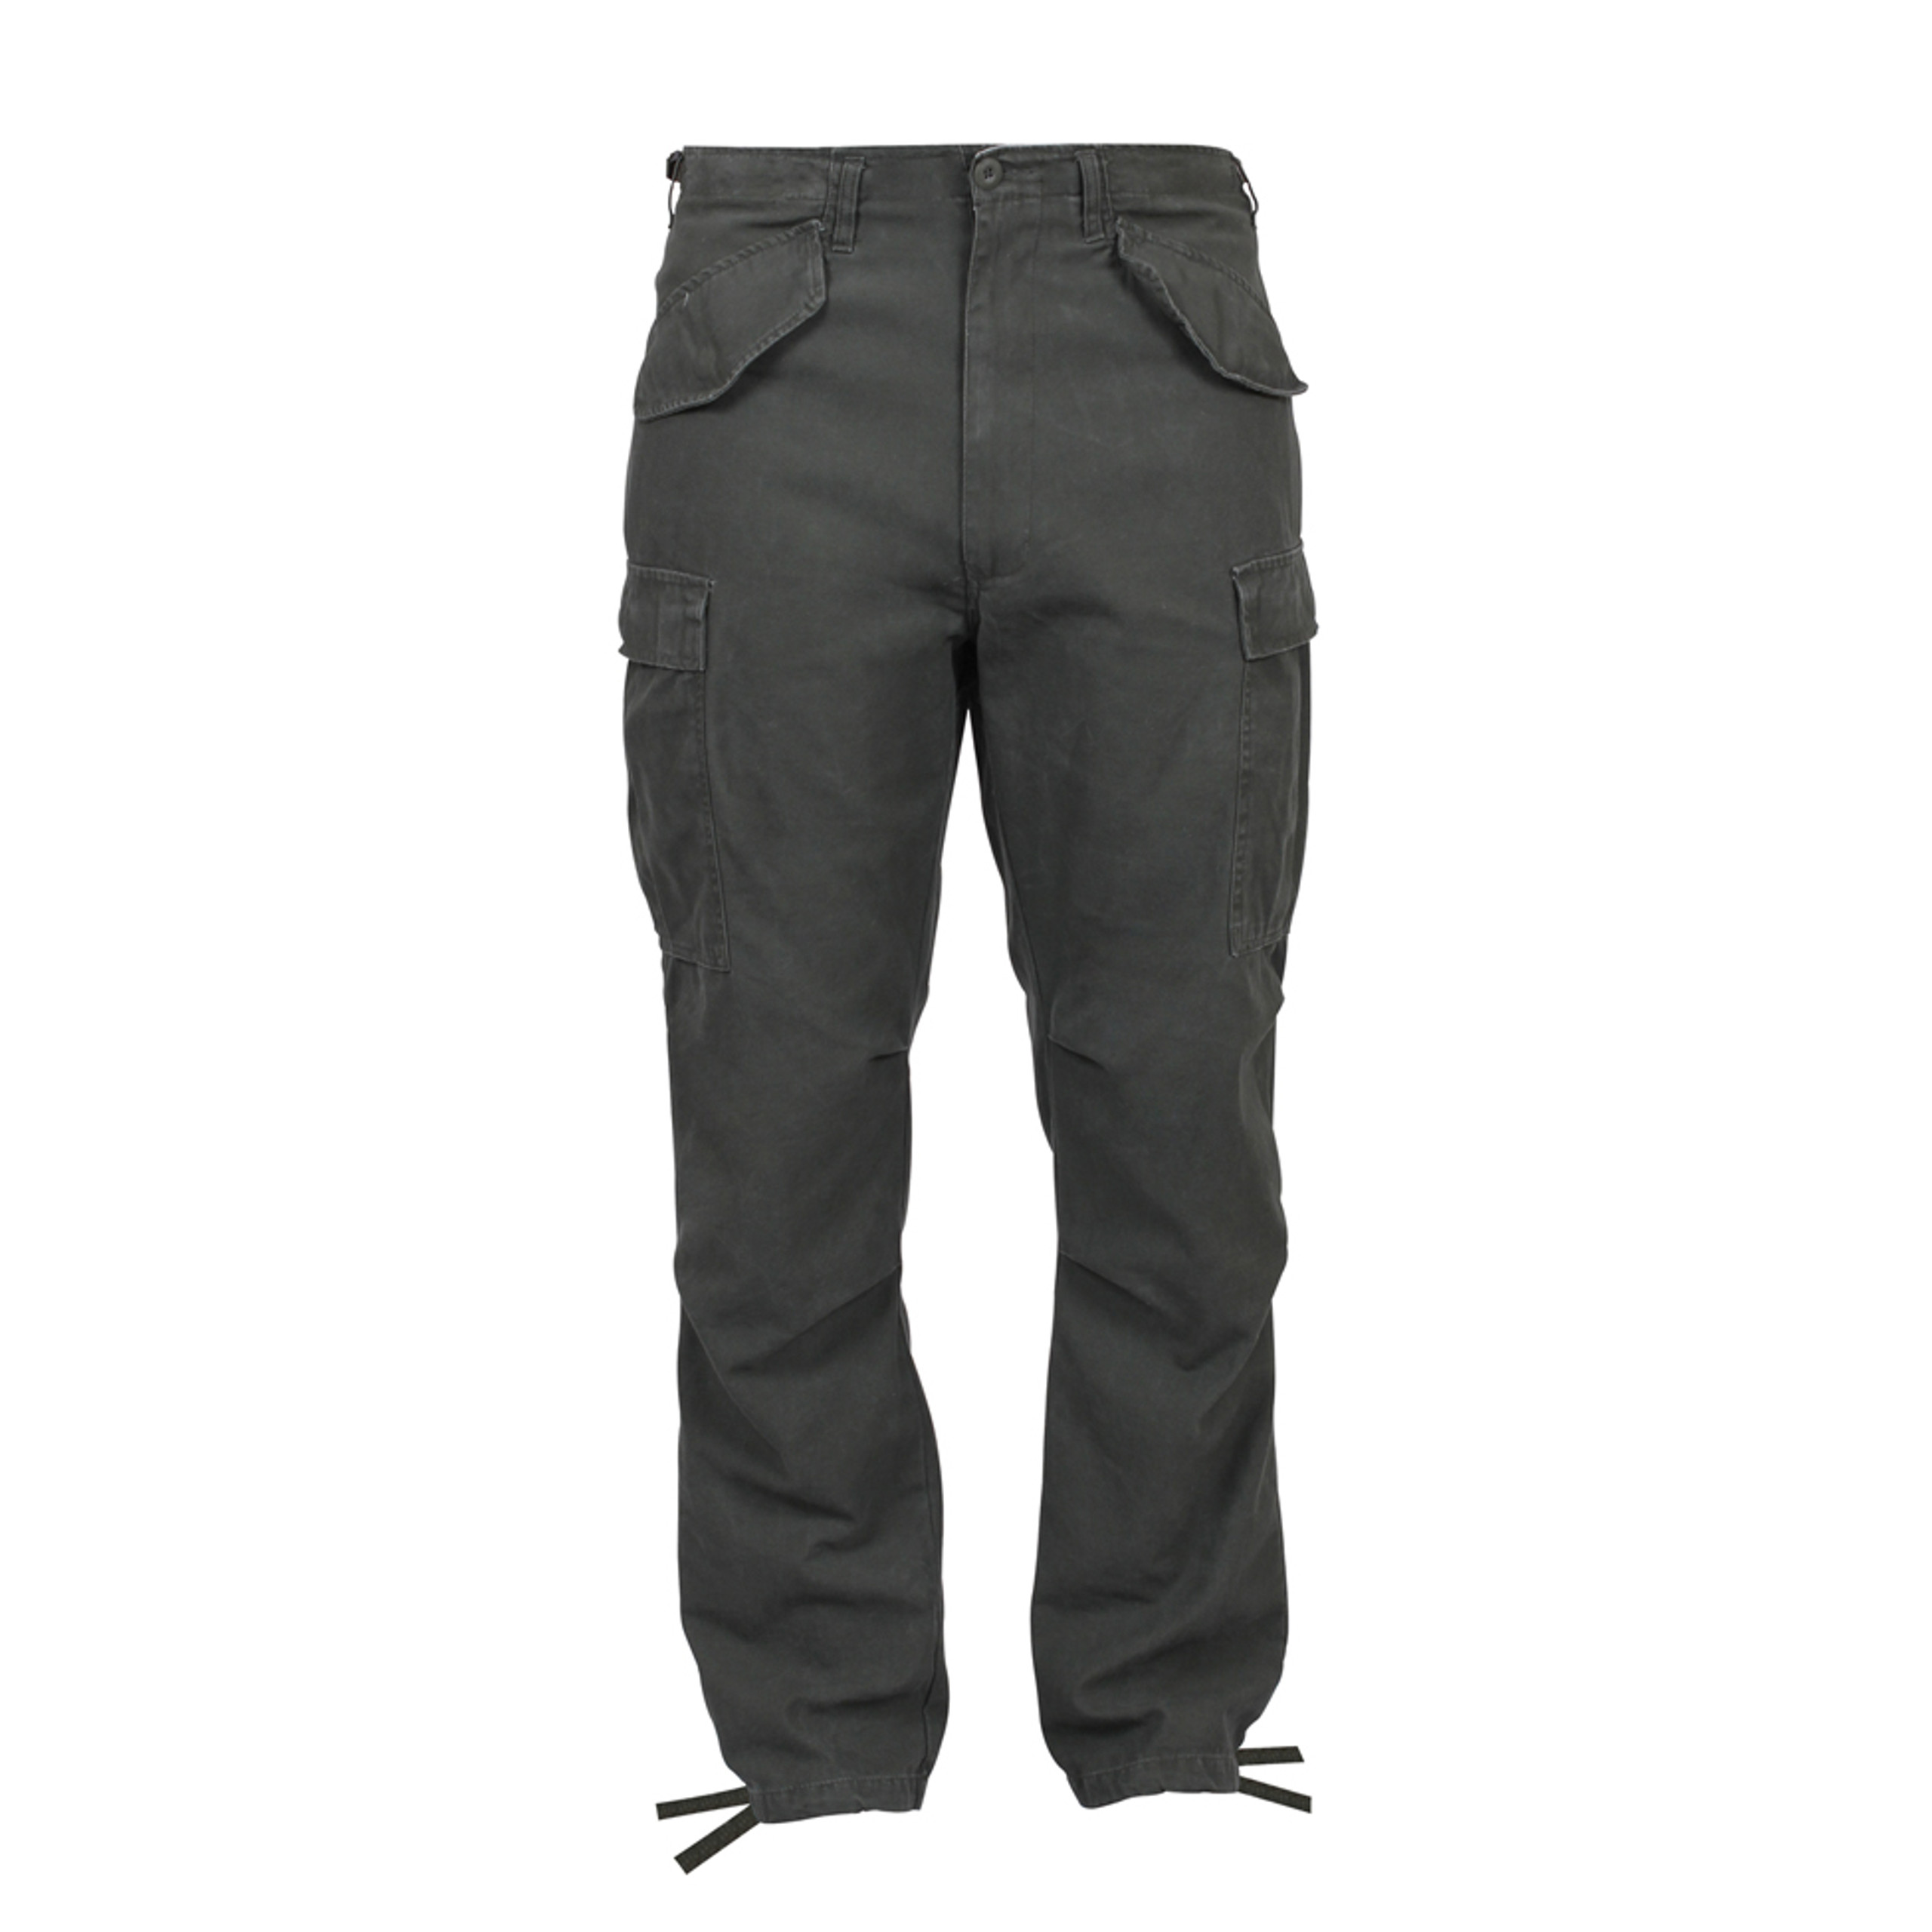 Shop Vintage M 65 Field Pants - Fatigues Army Navy Gear